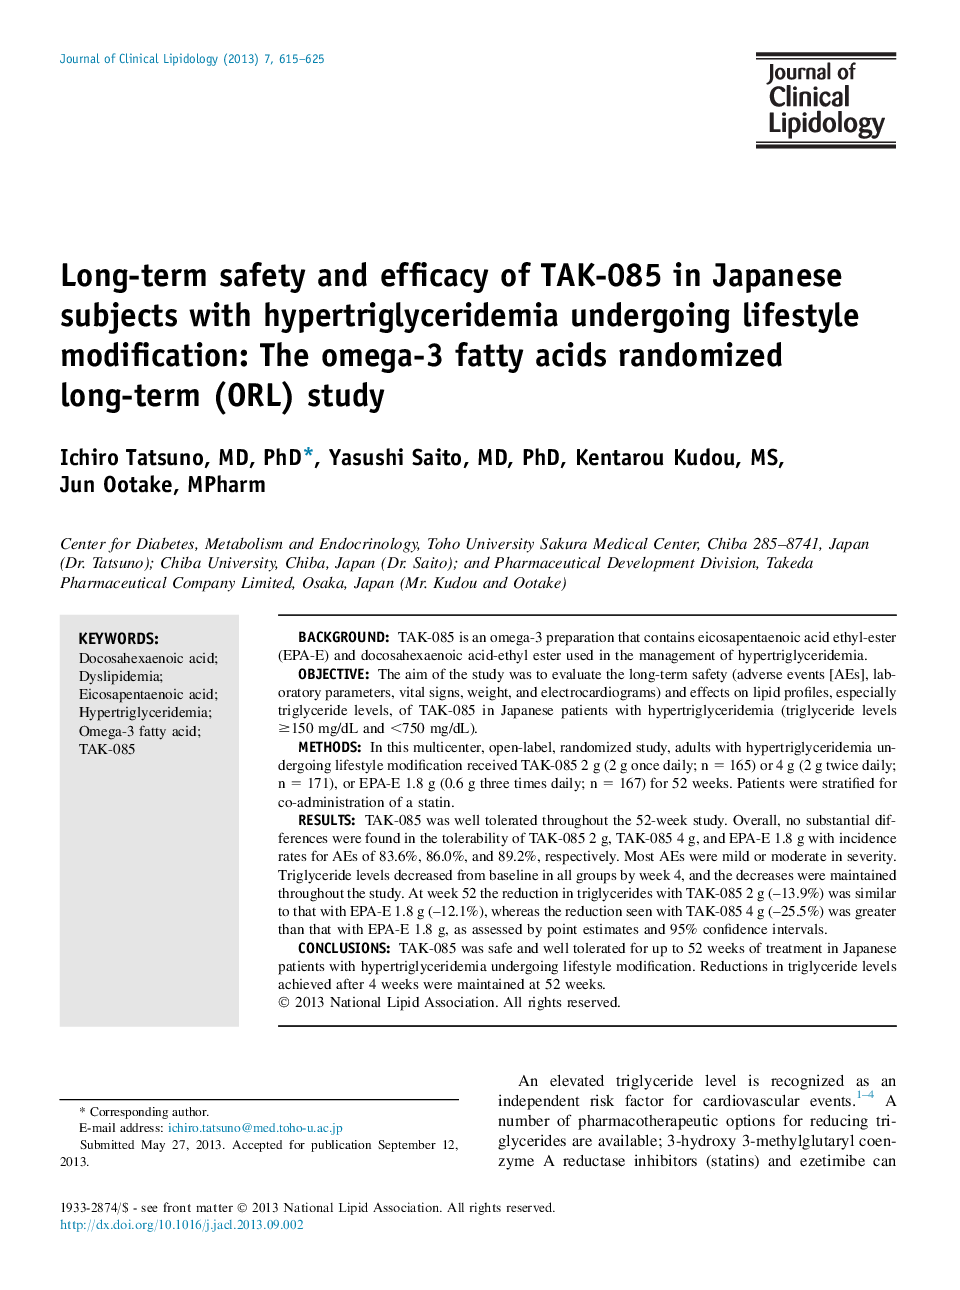 Long-term safety and efficacy of TAK-085 in Japanese subjects with hypertriglyceridemia undergoing lifestyle modification: The omega-3 fatty acids randomized long-term (ORL) study